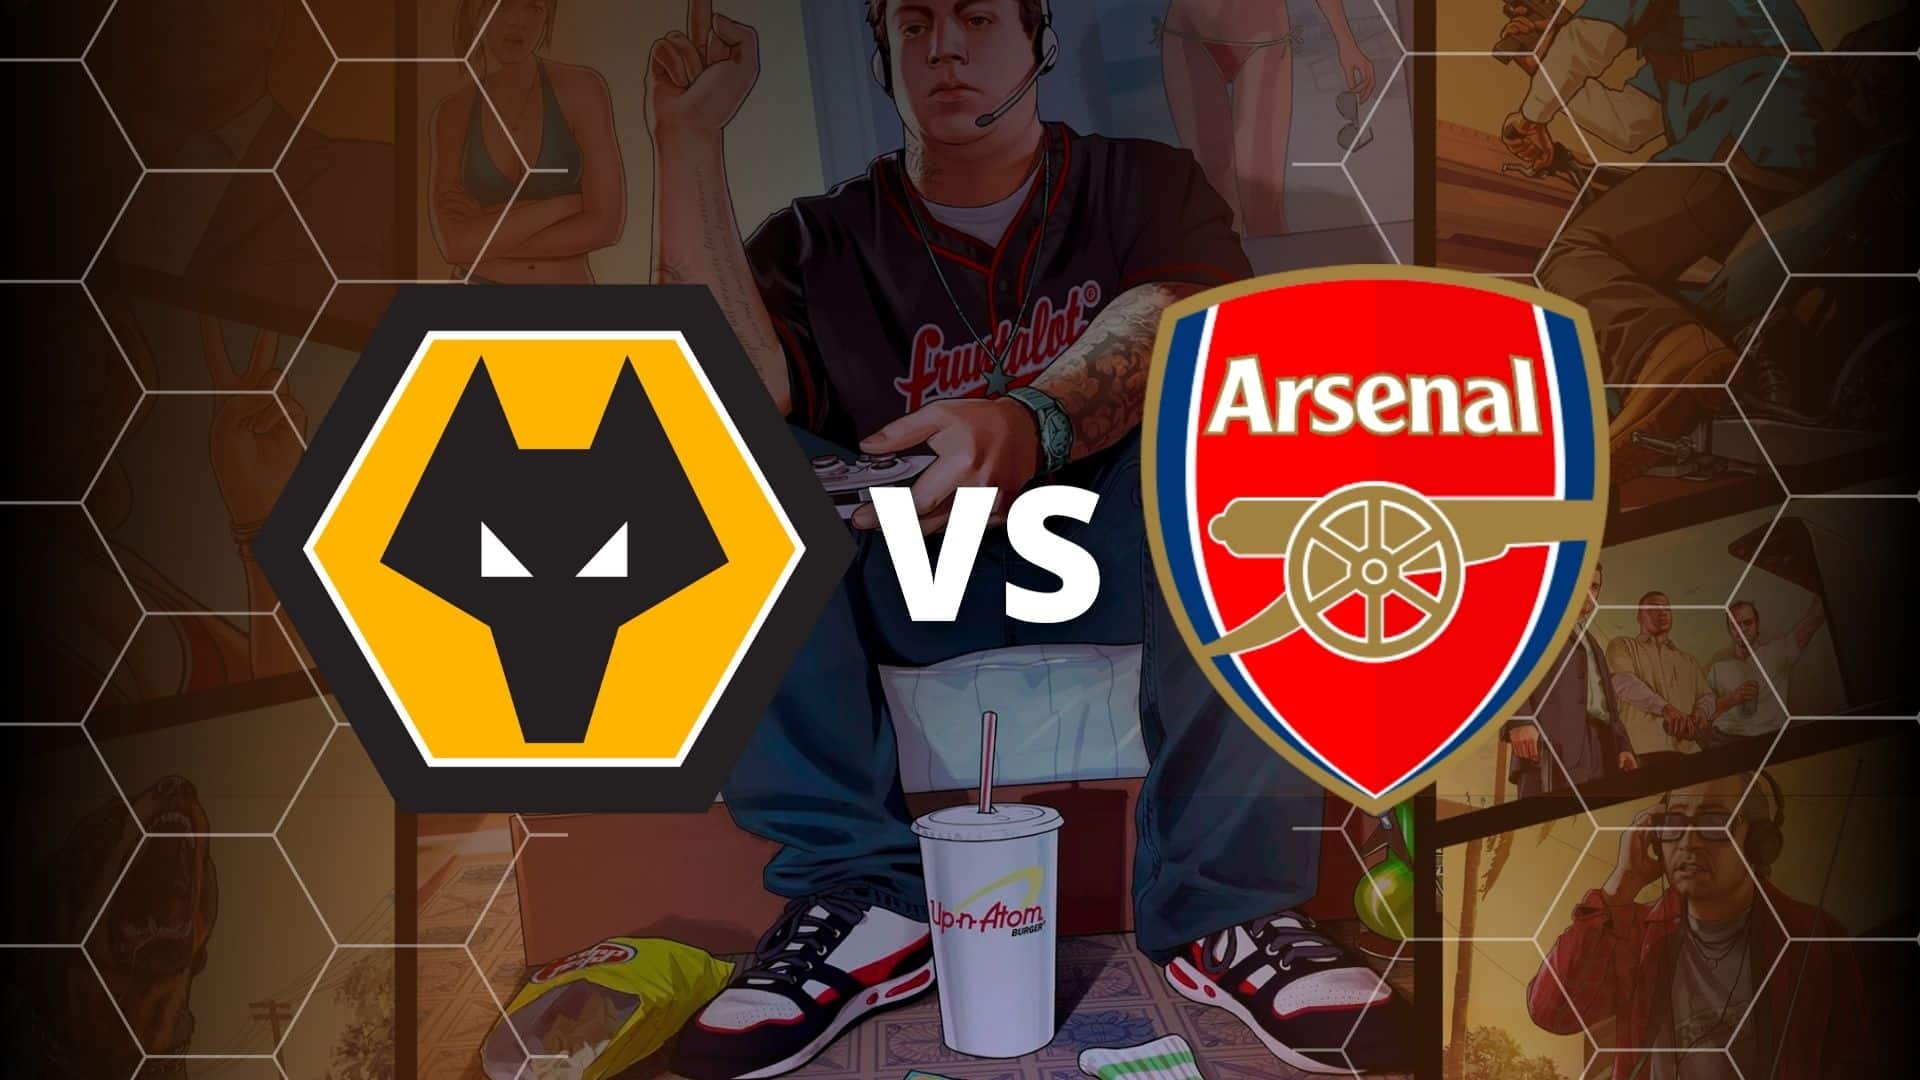 wolves vs arsenal premier league game with gta